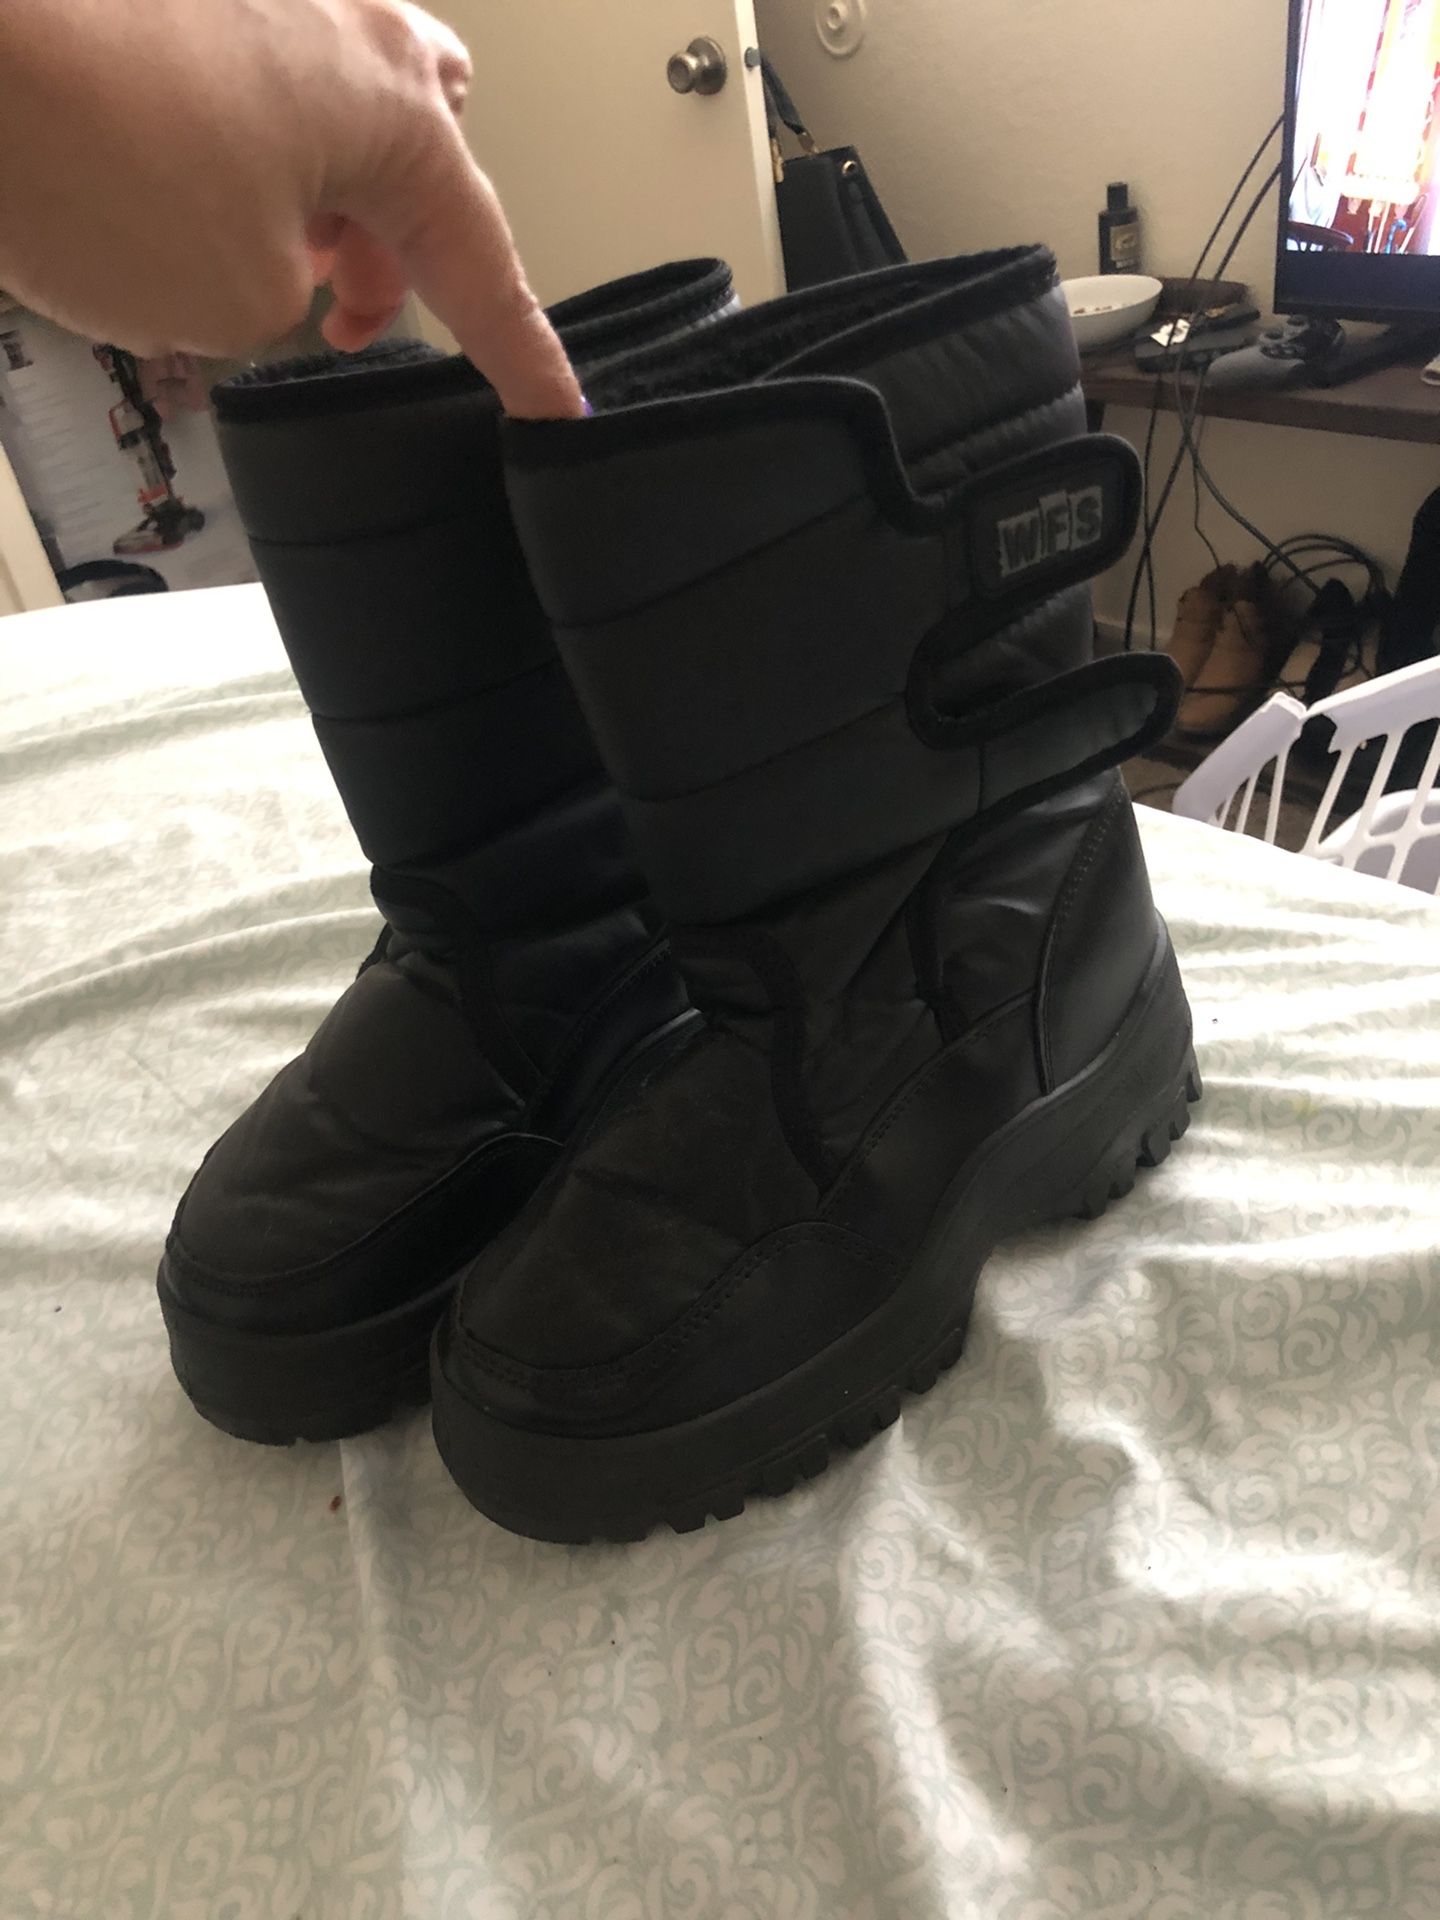 Kids snow boots size 4 USED ONCE vary good condition